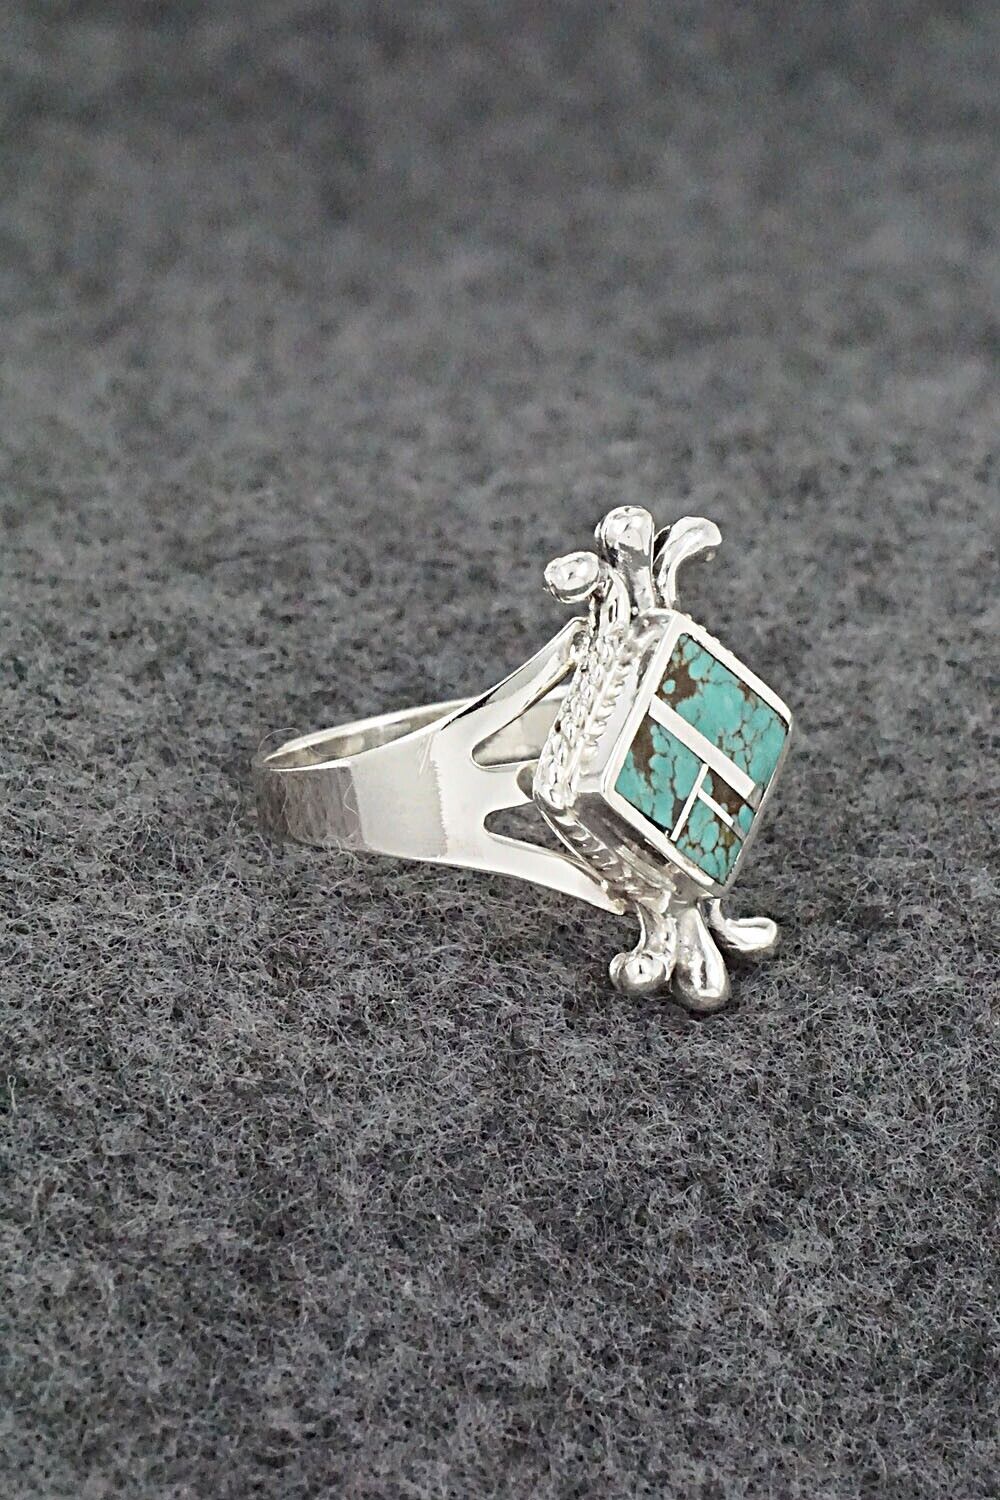 Turquoise & Sterling Silver Inlay Ring - James Manygoats - Size 8